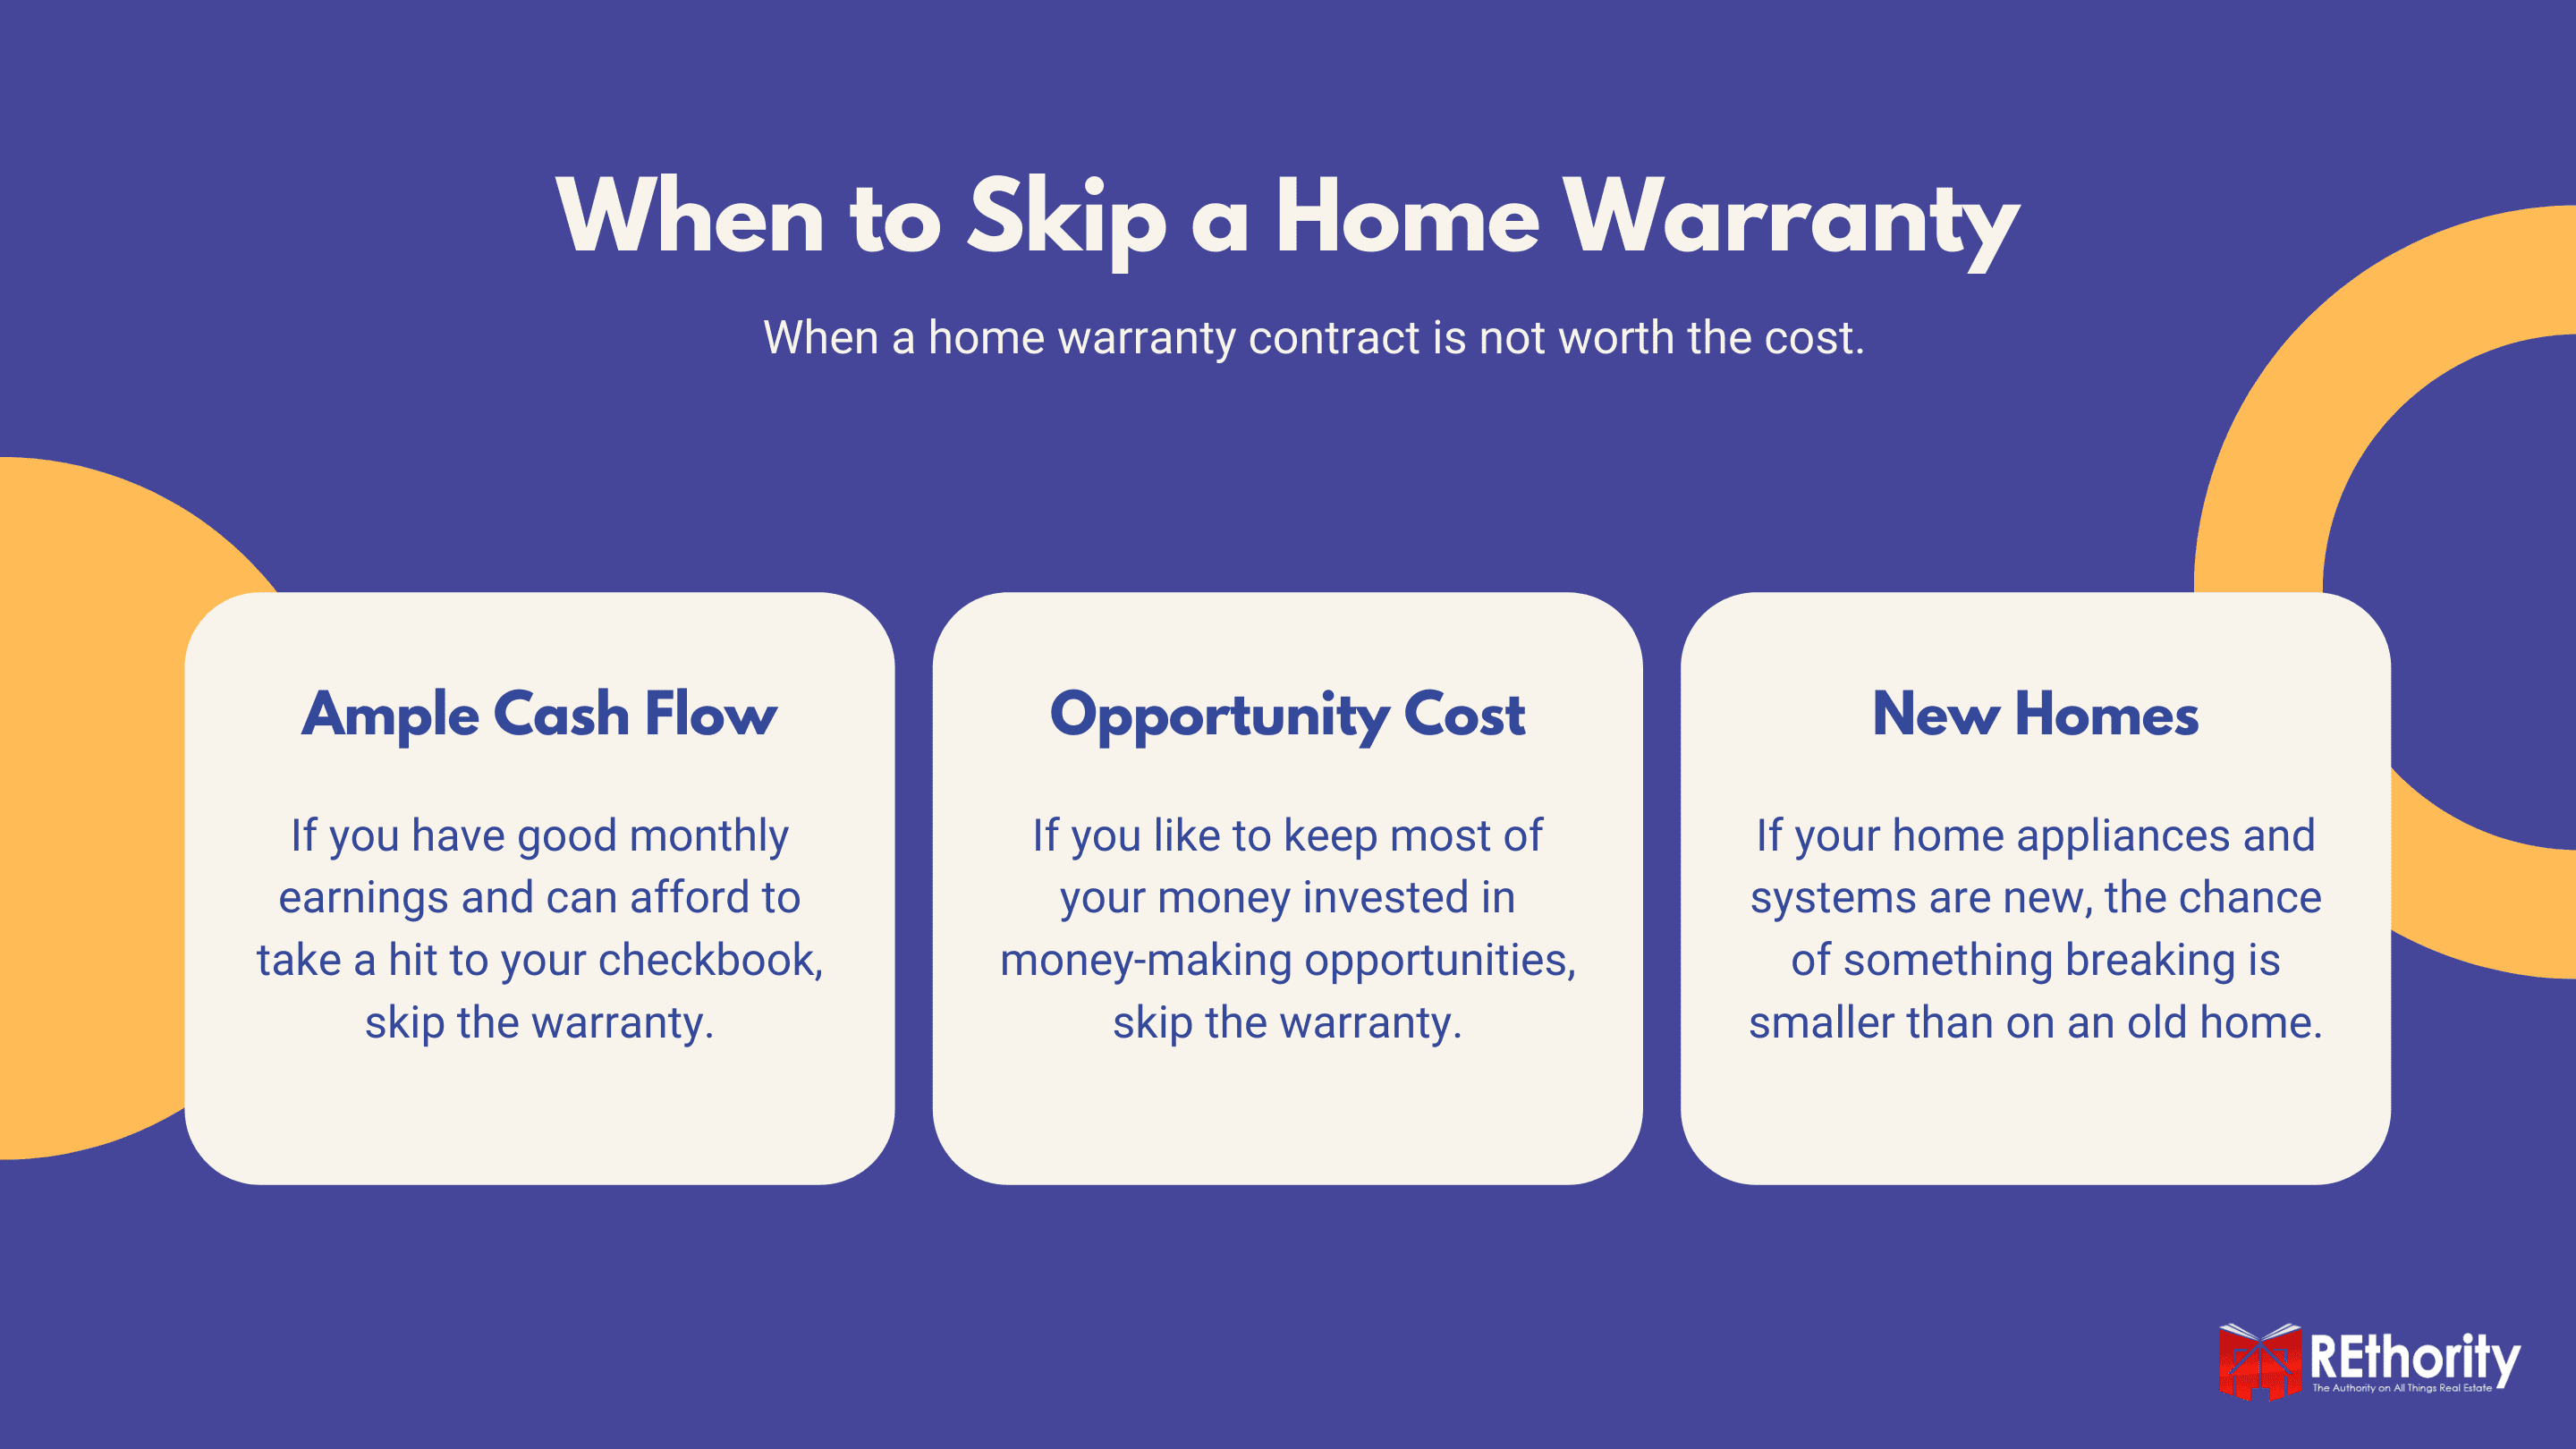 As a featured image for a piece on is a home warranty worth it, this is a graphic with three tan boxes against a blue background highlighting when a home warranty is not worth it